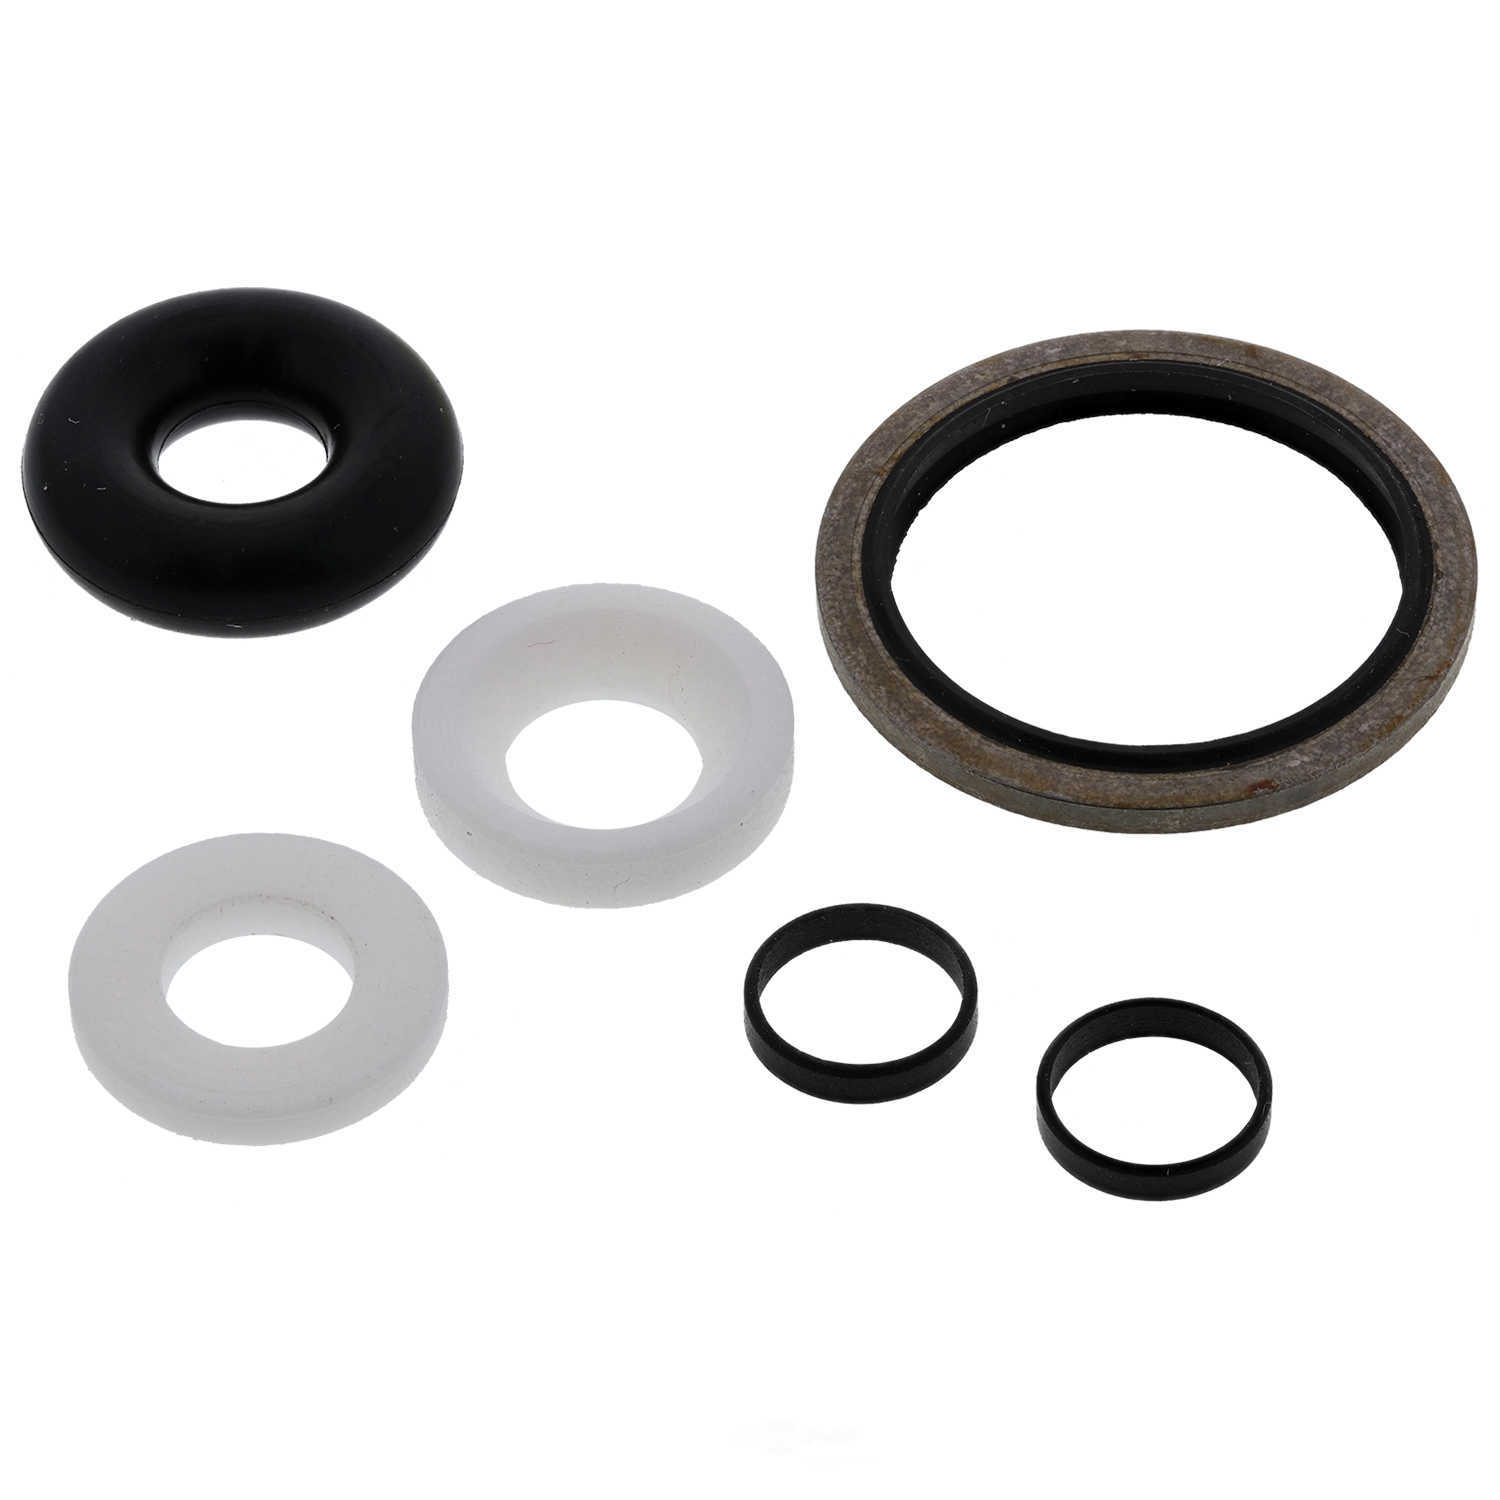 GB REMANUFACTURING INC. - Fuel Injector Seal Kit - GBR 8-058